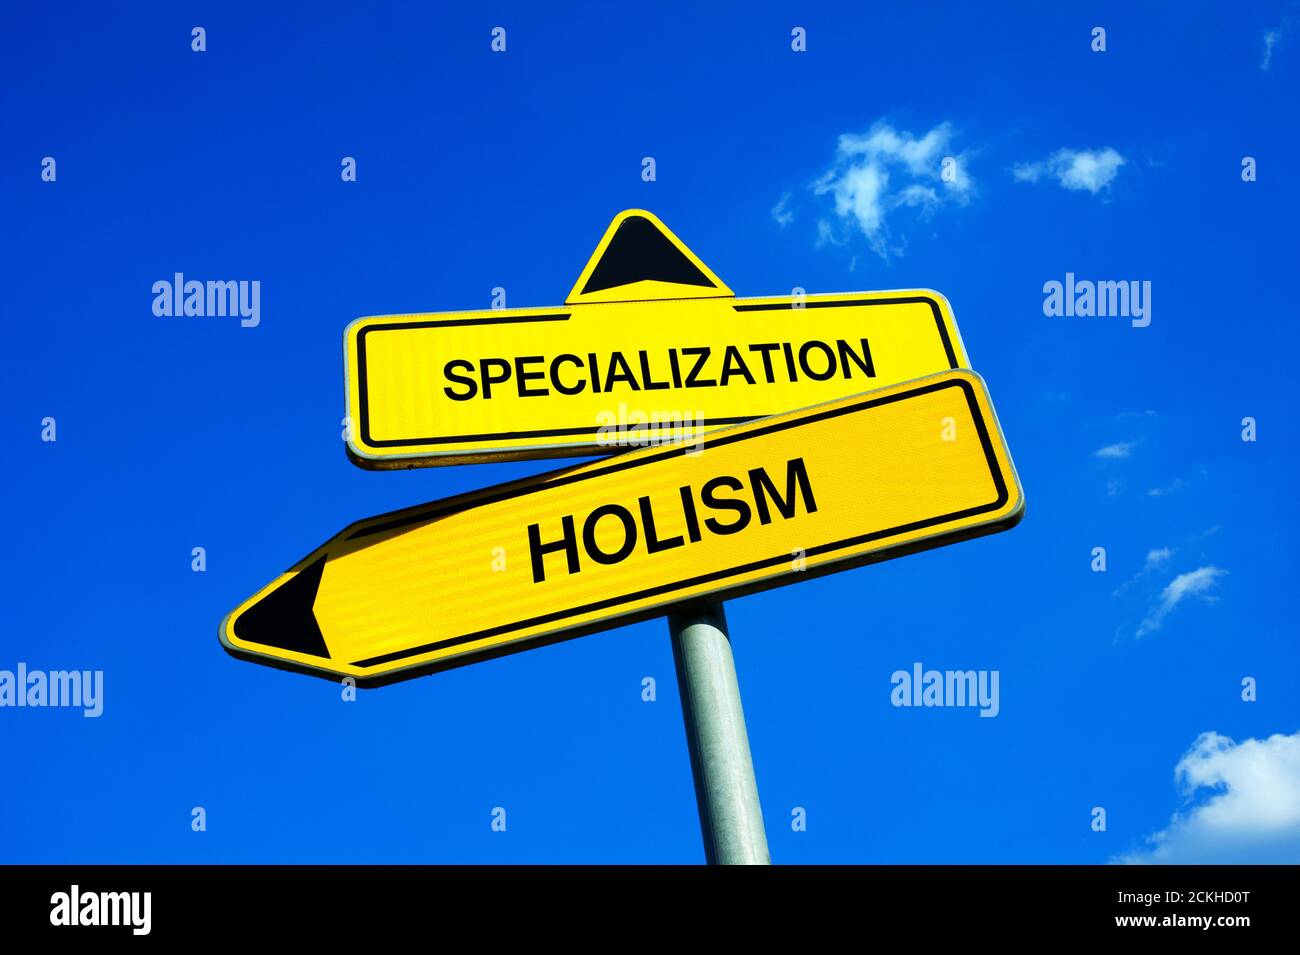 Specialization vs Holism - Traffic sign with two options. Science and medicine based on specialized reductionism and analysis vs alternative holistic Stock Photo